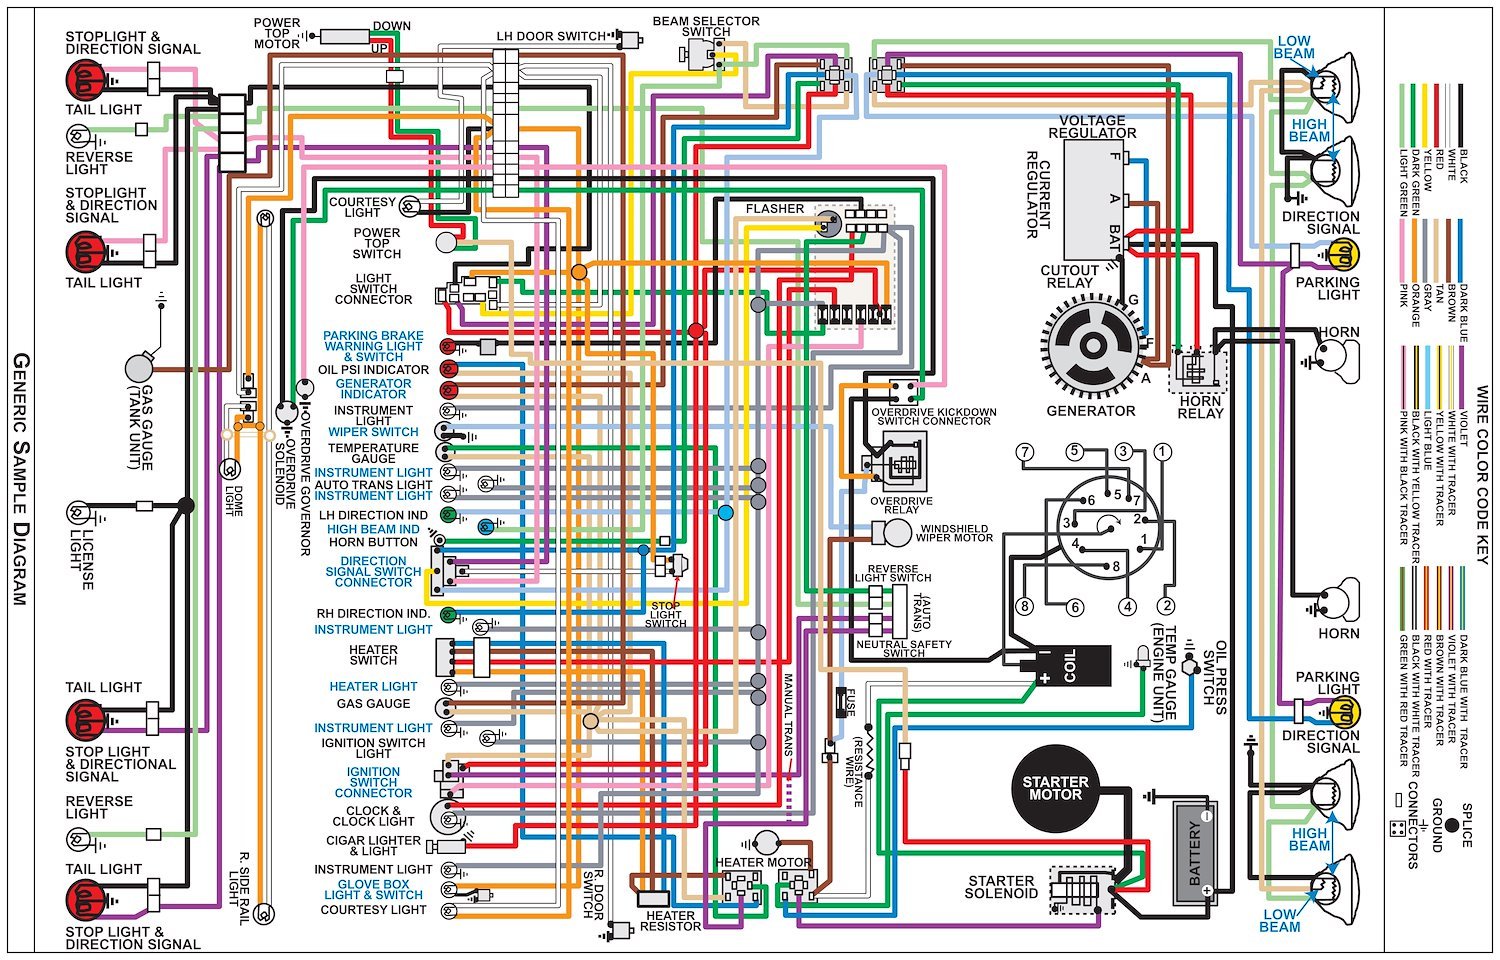 Wiring Diagram for 1954 Ford Car, 11 in x 17 in., Laminated